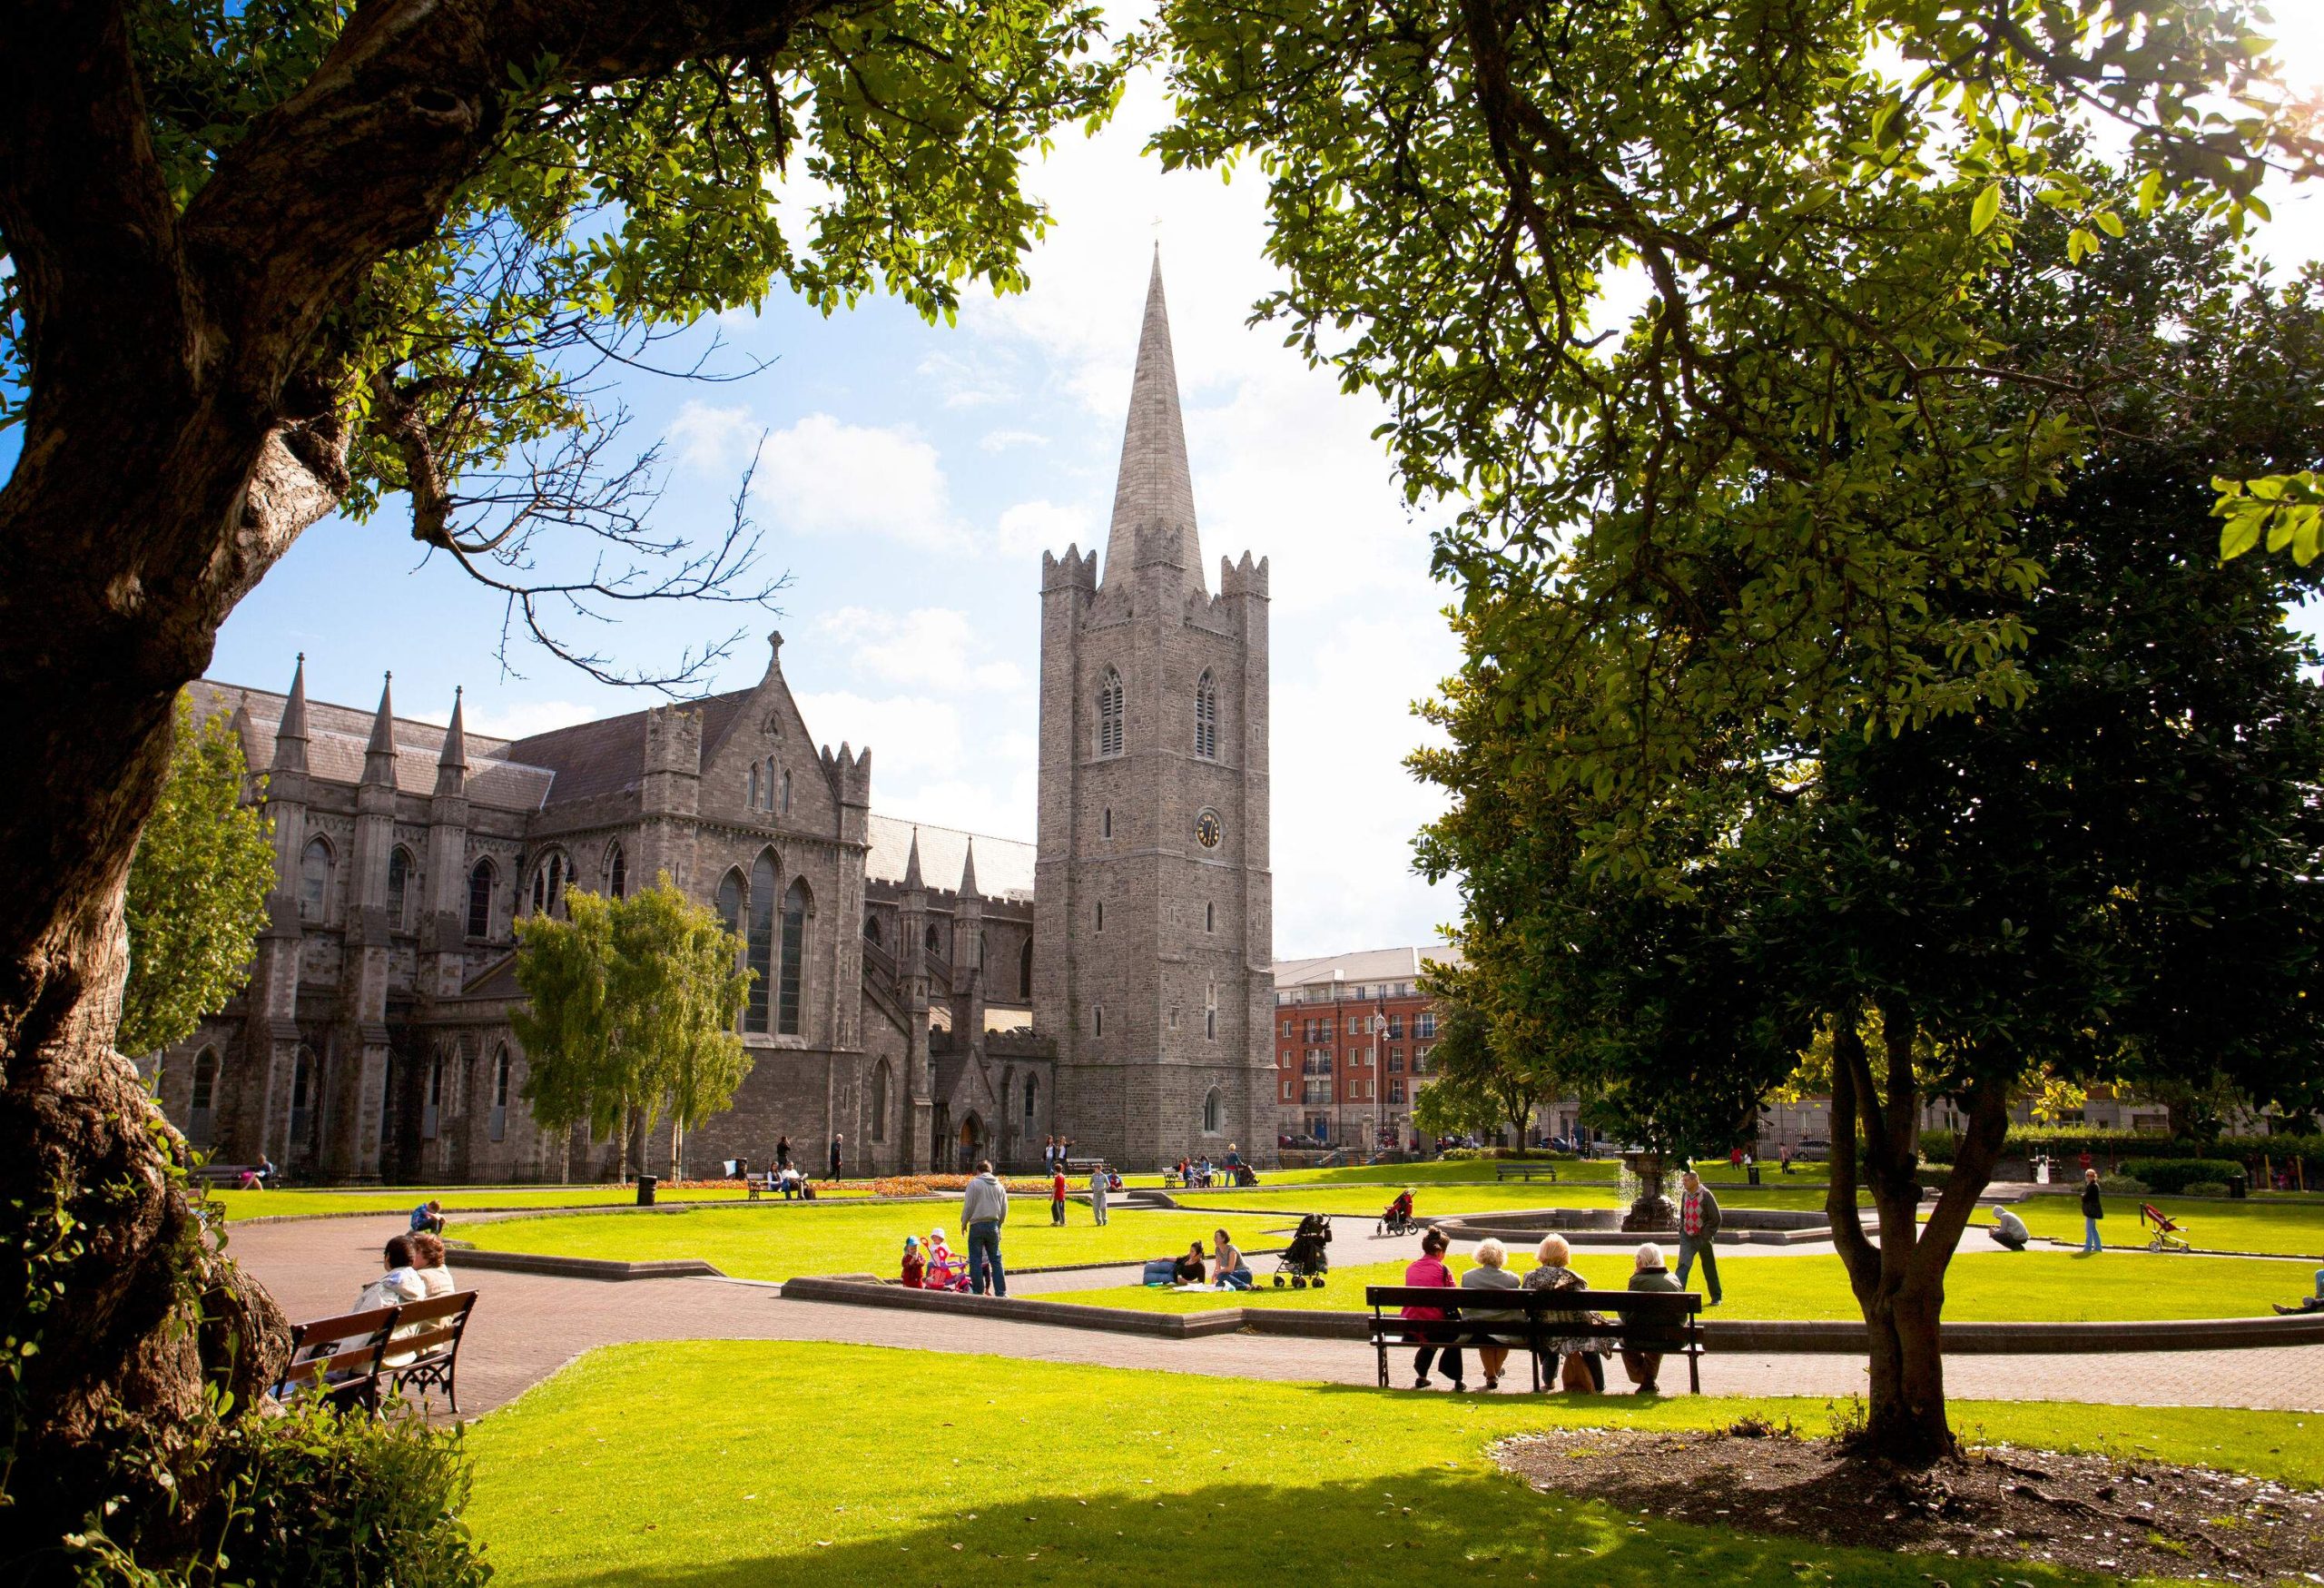 People enjoying a pleasant day at a park in front of St Patrick's Cathedral.